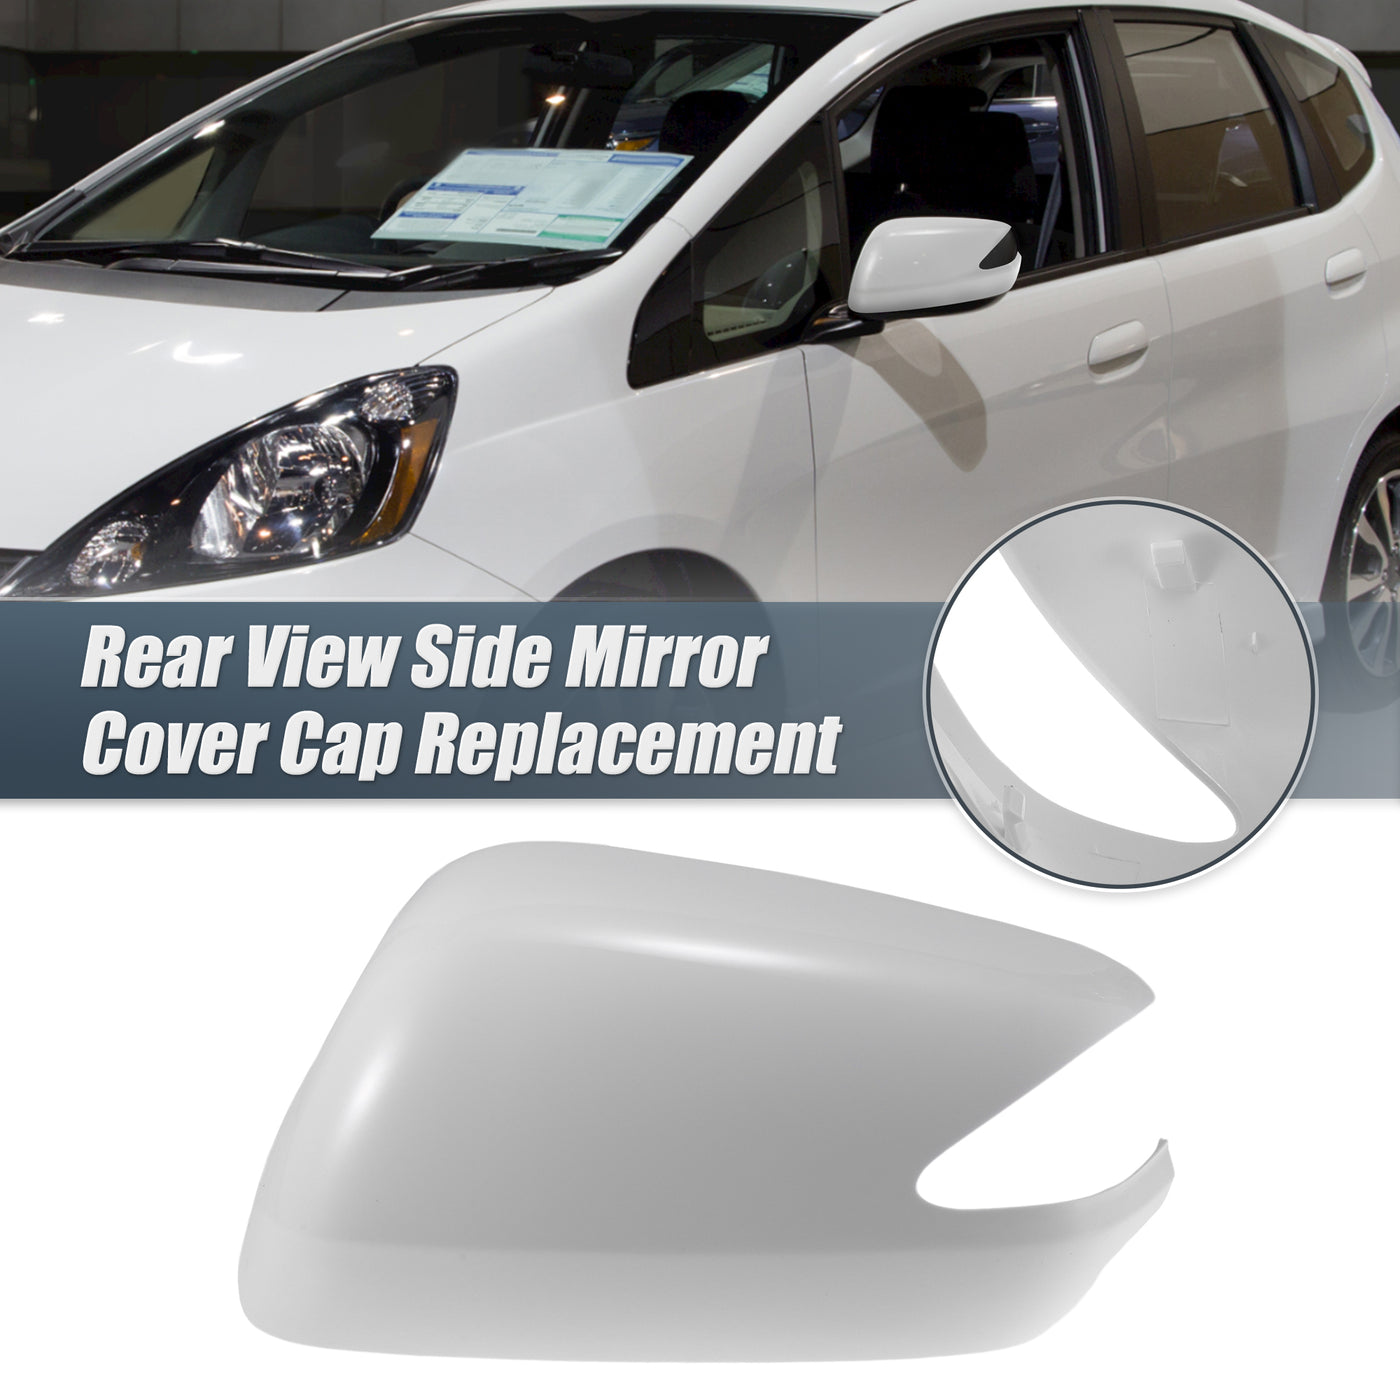 X AUTOHAUX Car Rear View Left Driver Side Mirror Cover Cap Replacement White for Honda Fit 2009-2013 Fits W/ Turn Signal Models Mirror Guard Covers Exterior Decoration Trims